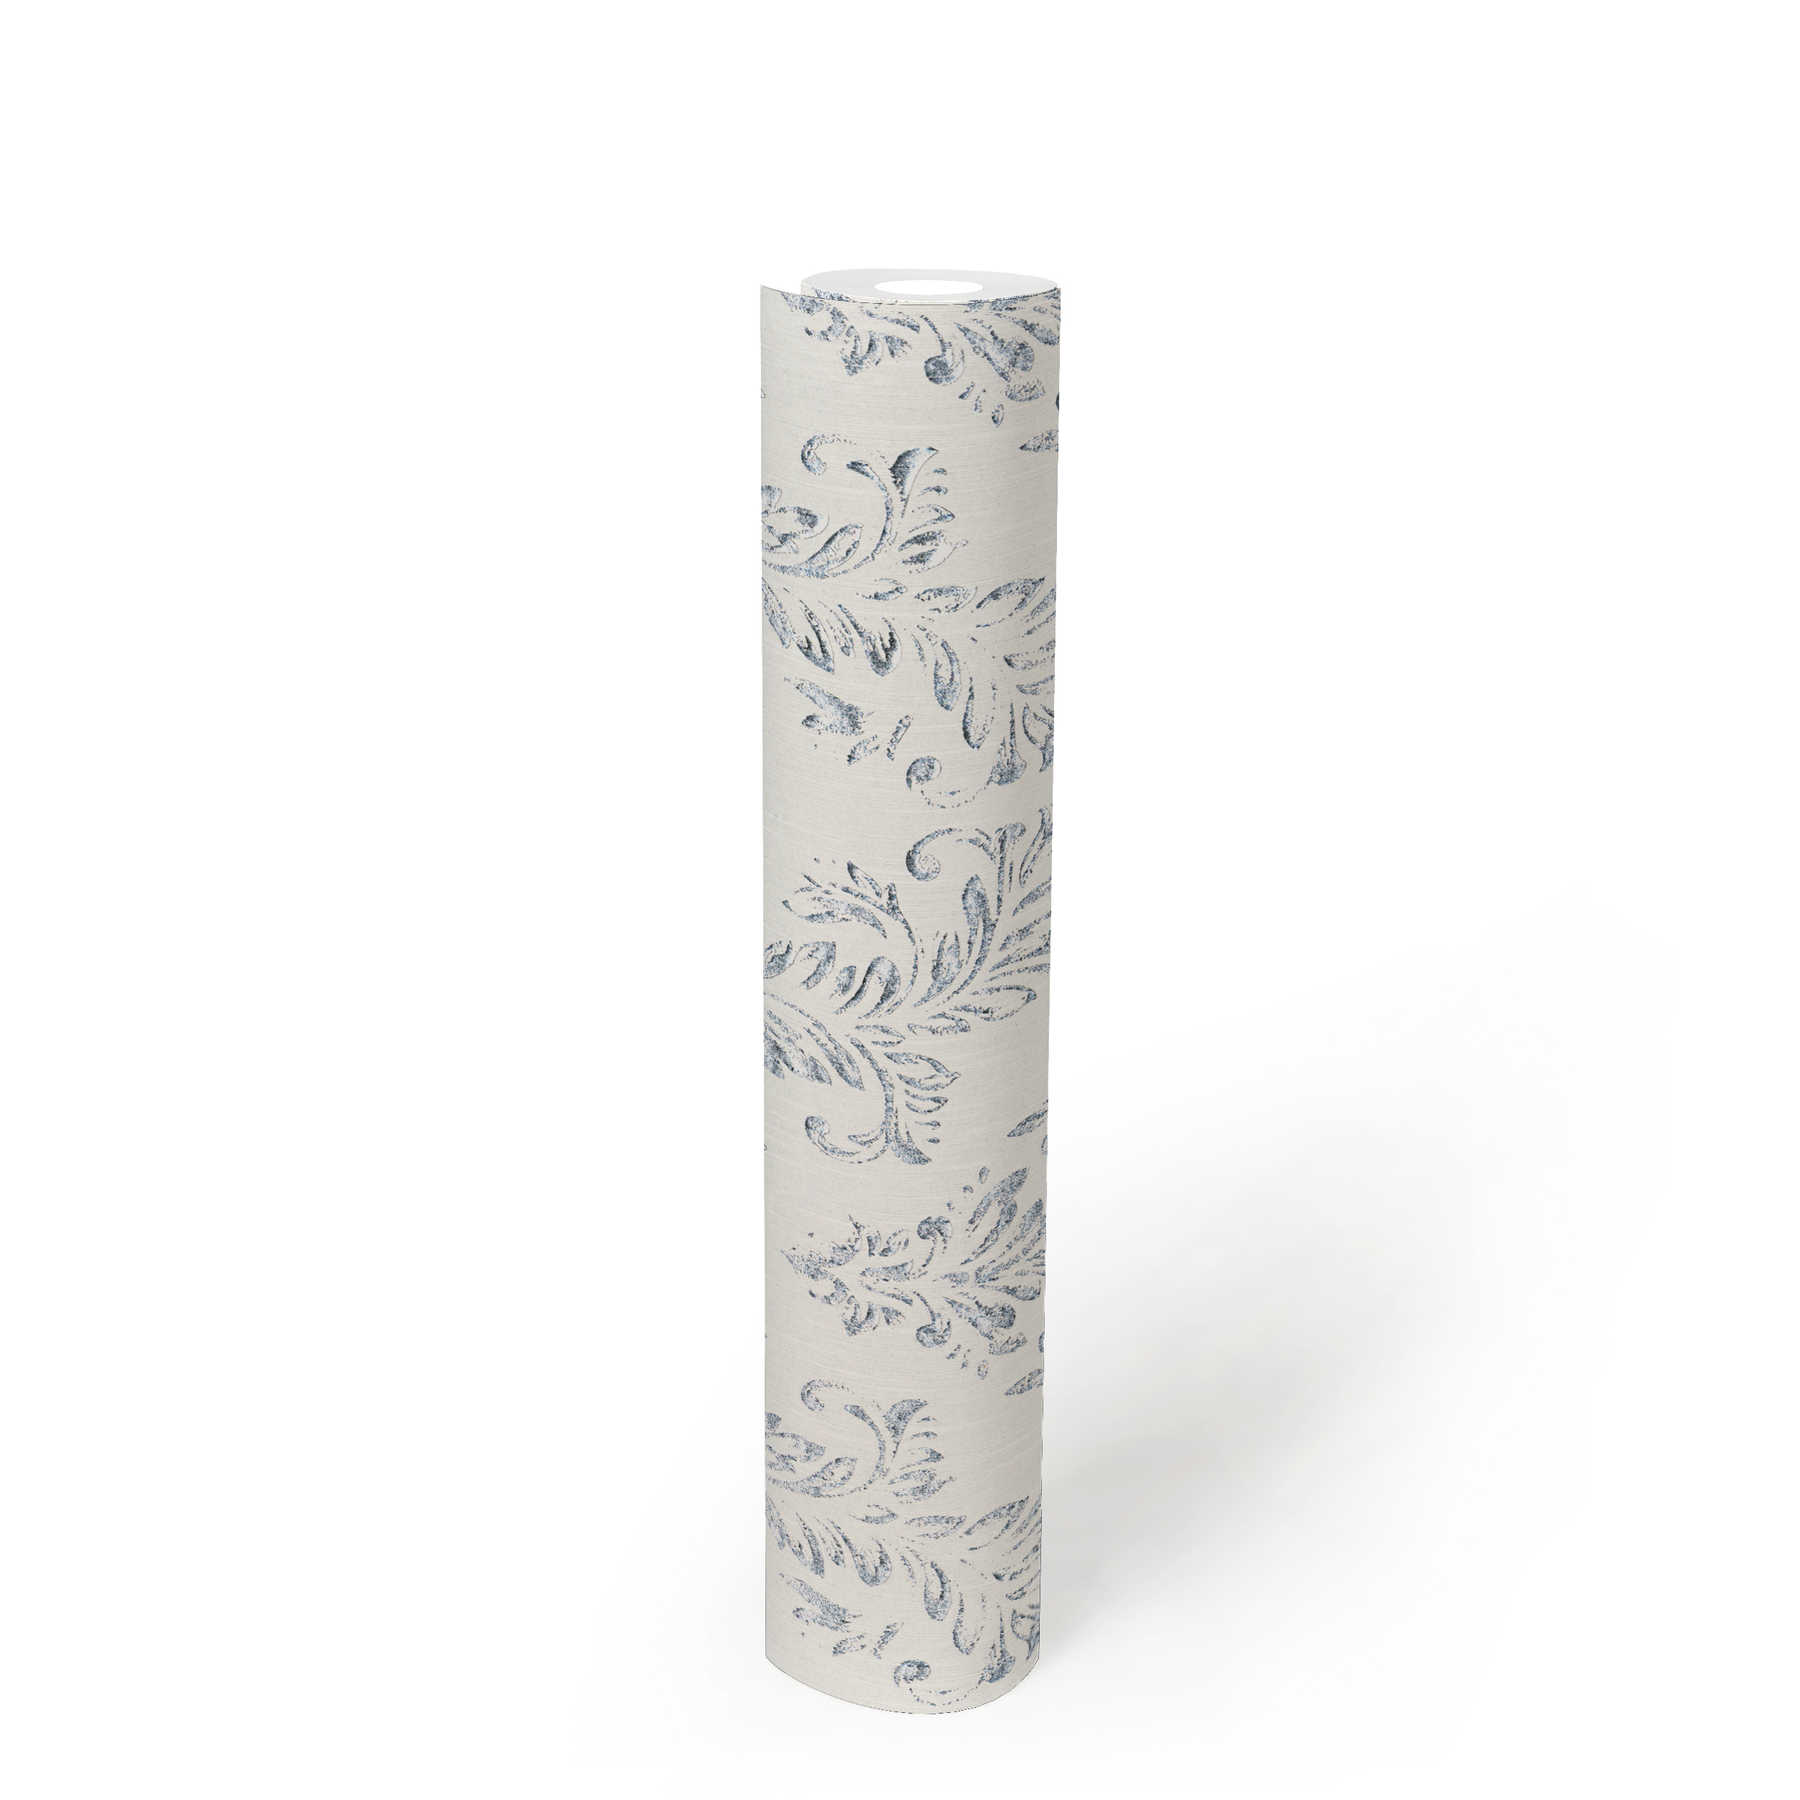             Ornament wallpaper in floral design with glitter effect - silver, white
        